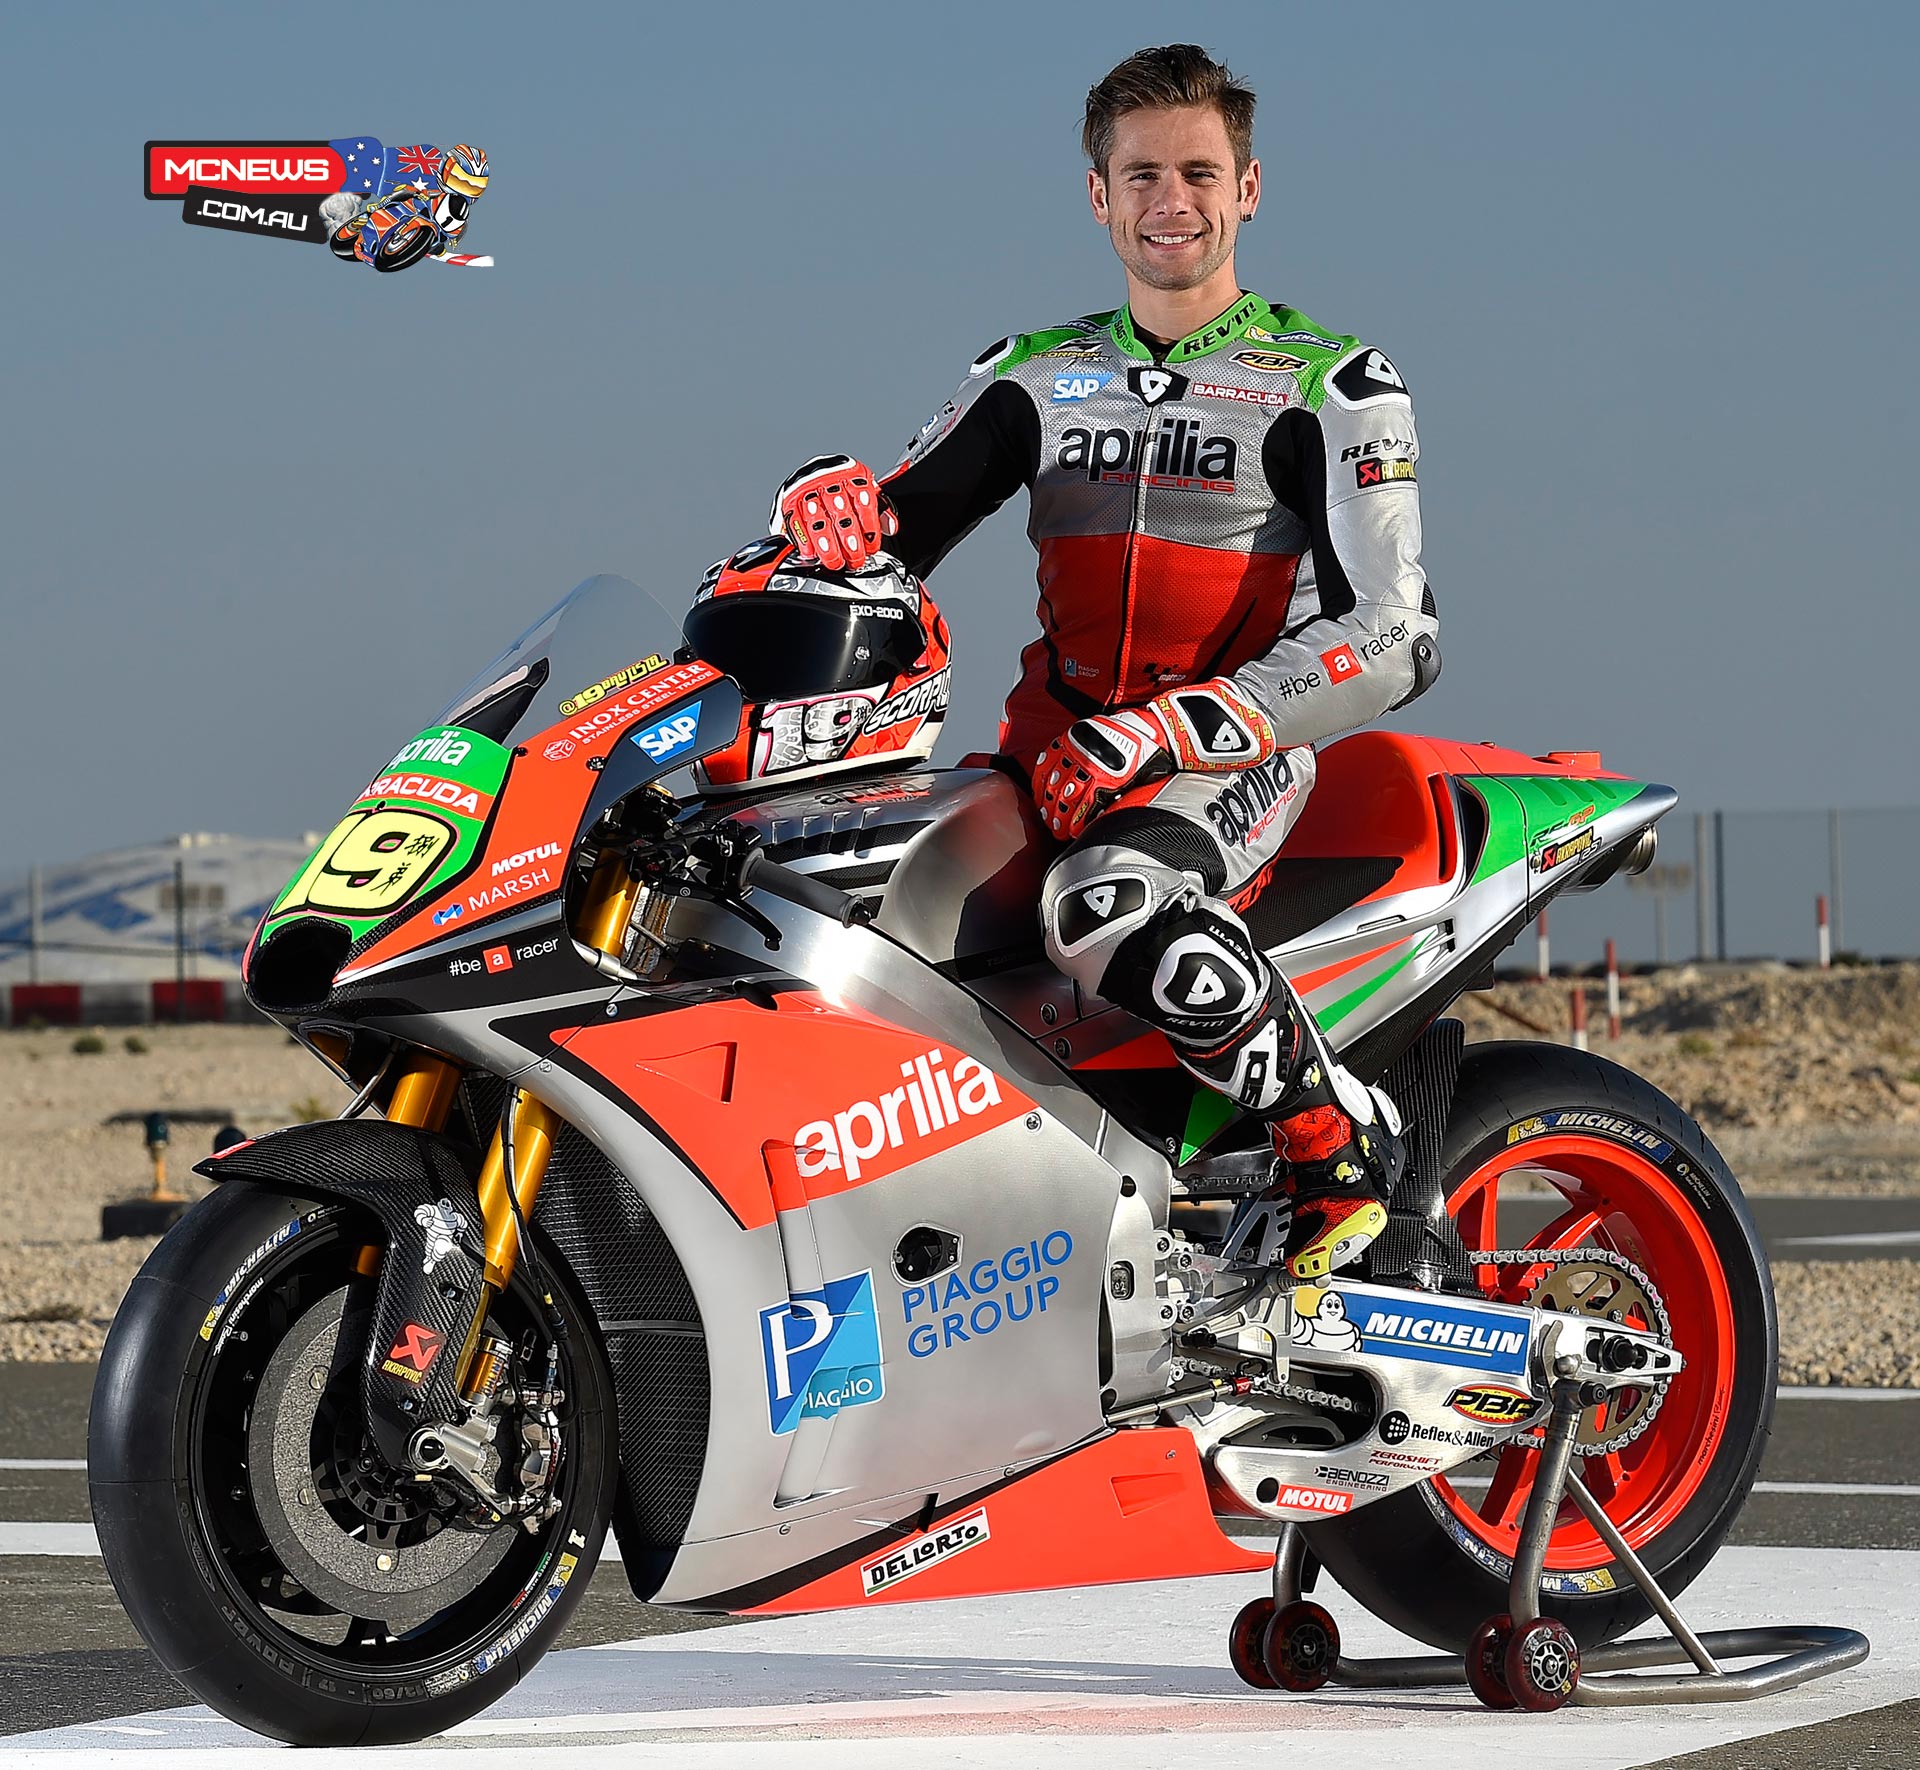 16 Aprilia Rs Gp Full Reveal Motorcycle News Sport And Reviews